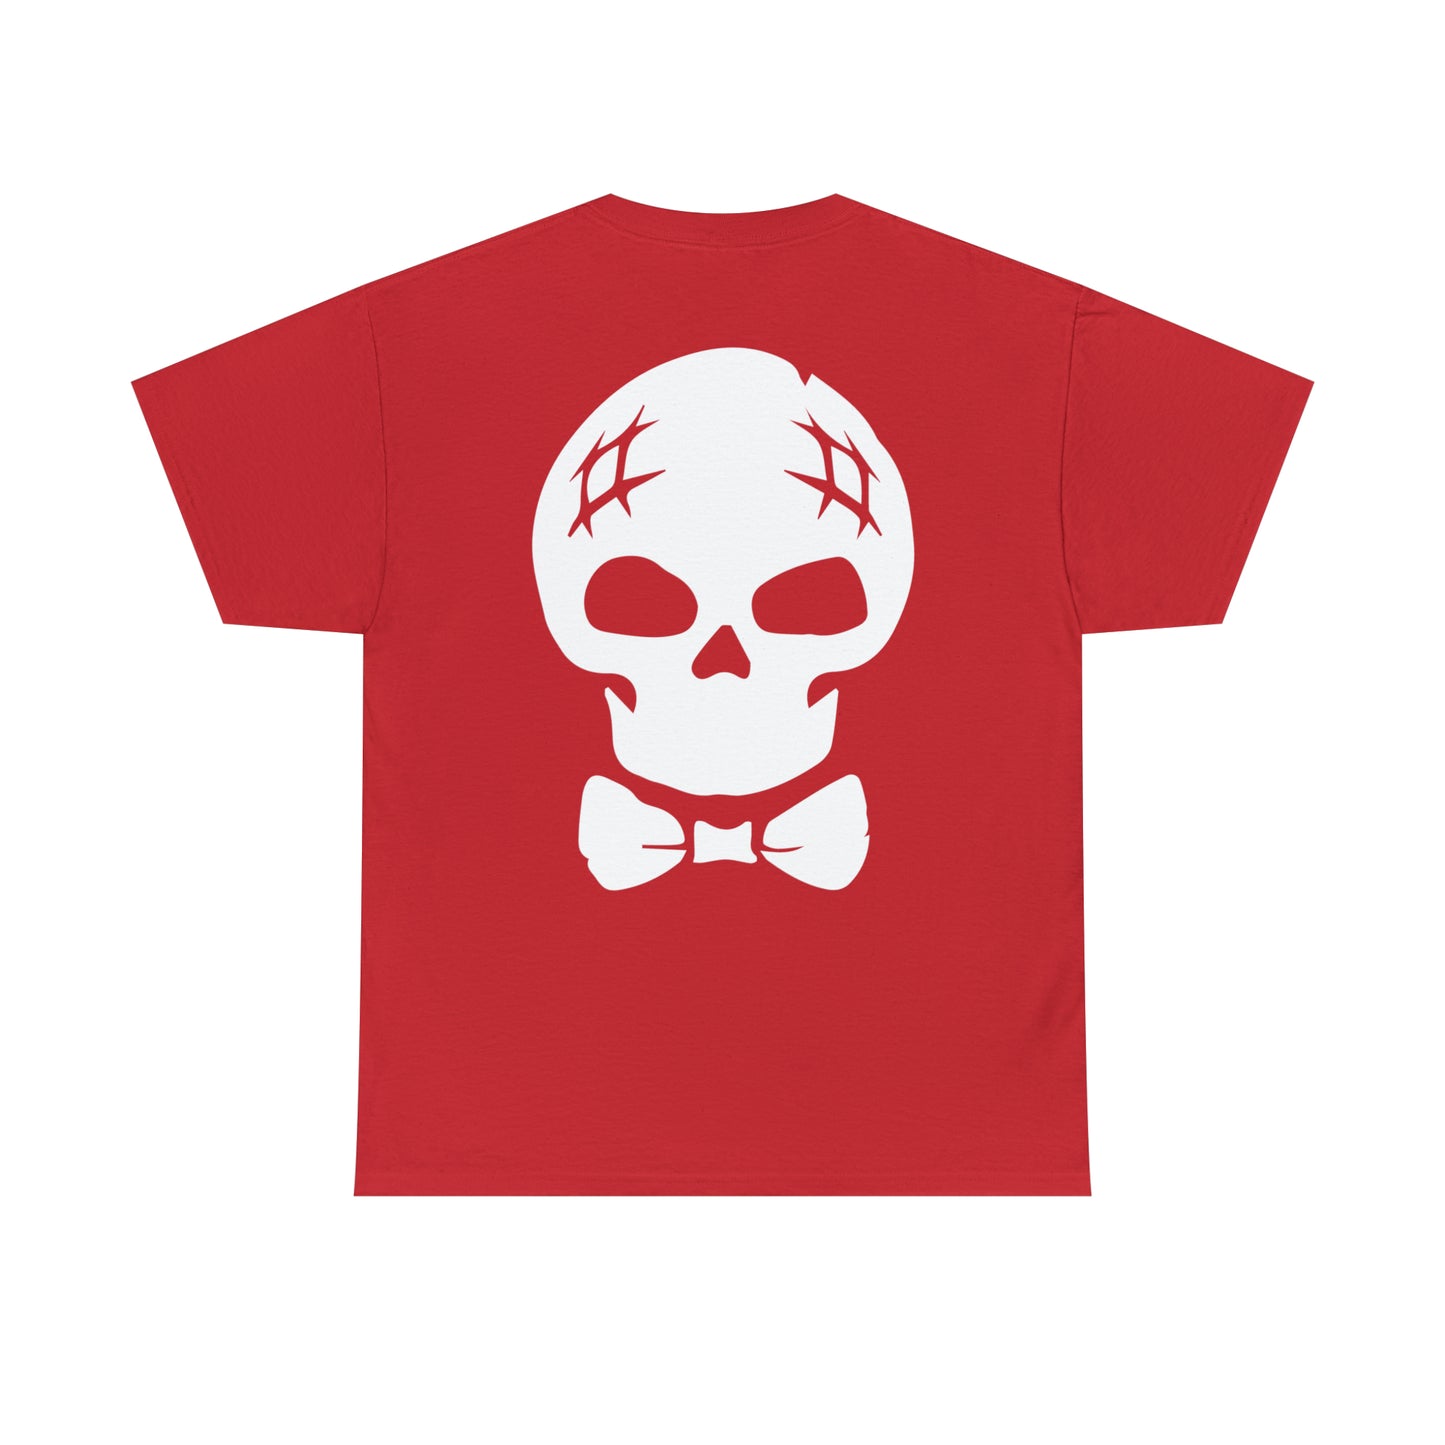 Archie Horror Logo Graphic Tee (Unisex Heavy Cotton Tee) featuring Archie Skull on Back